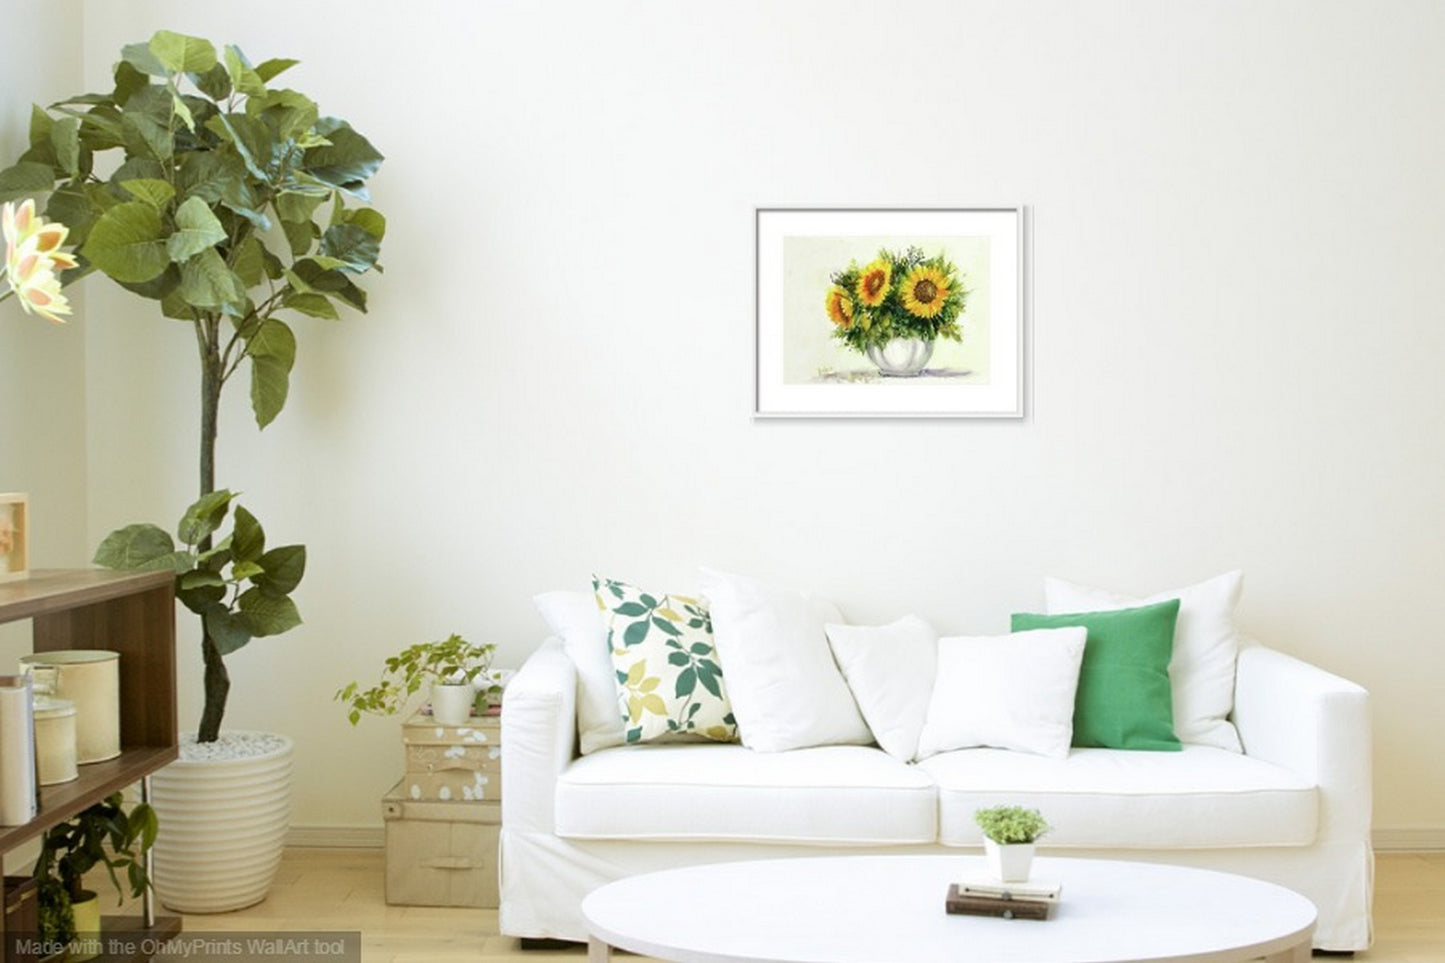 Virtual room view, Vase of Summer sunflowers, Living room floral decor